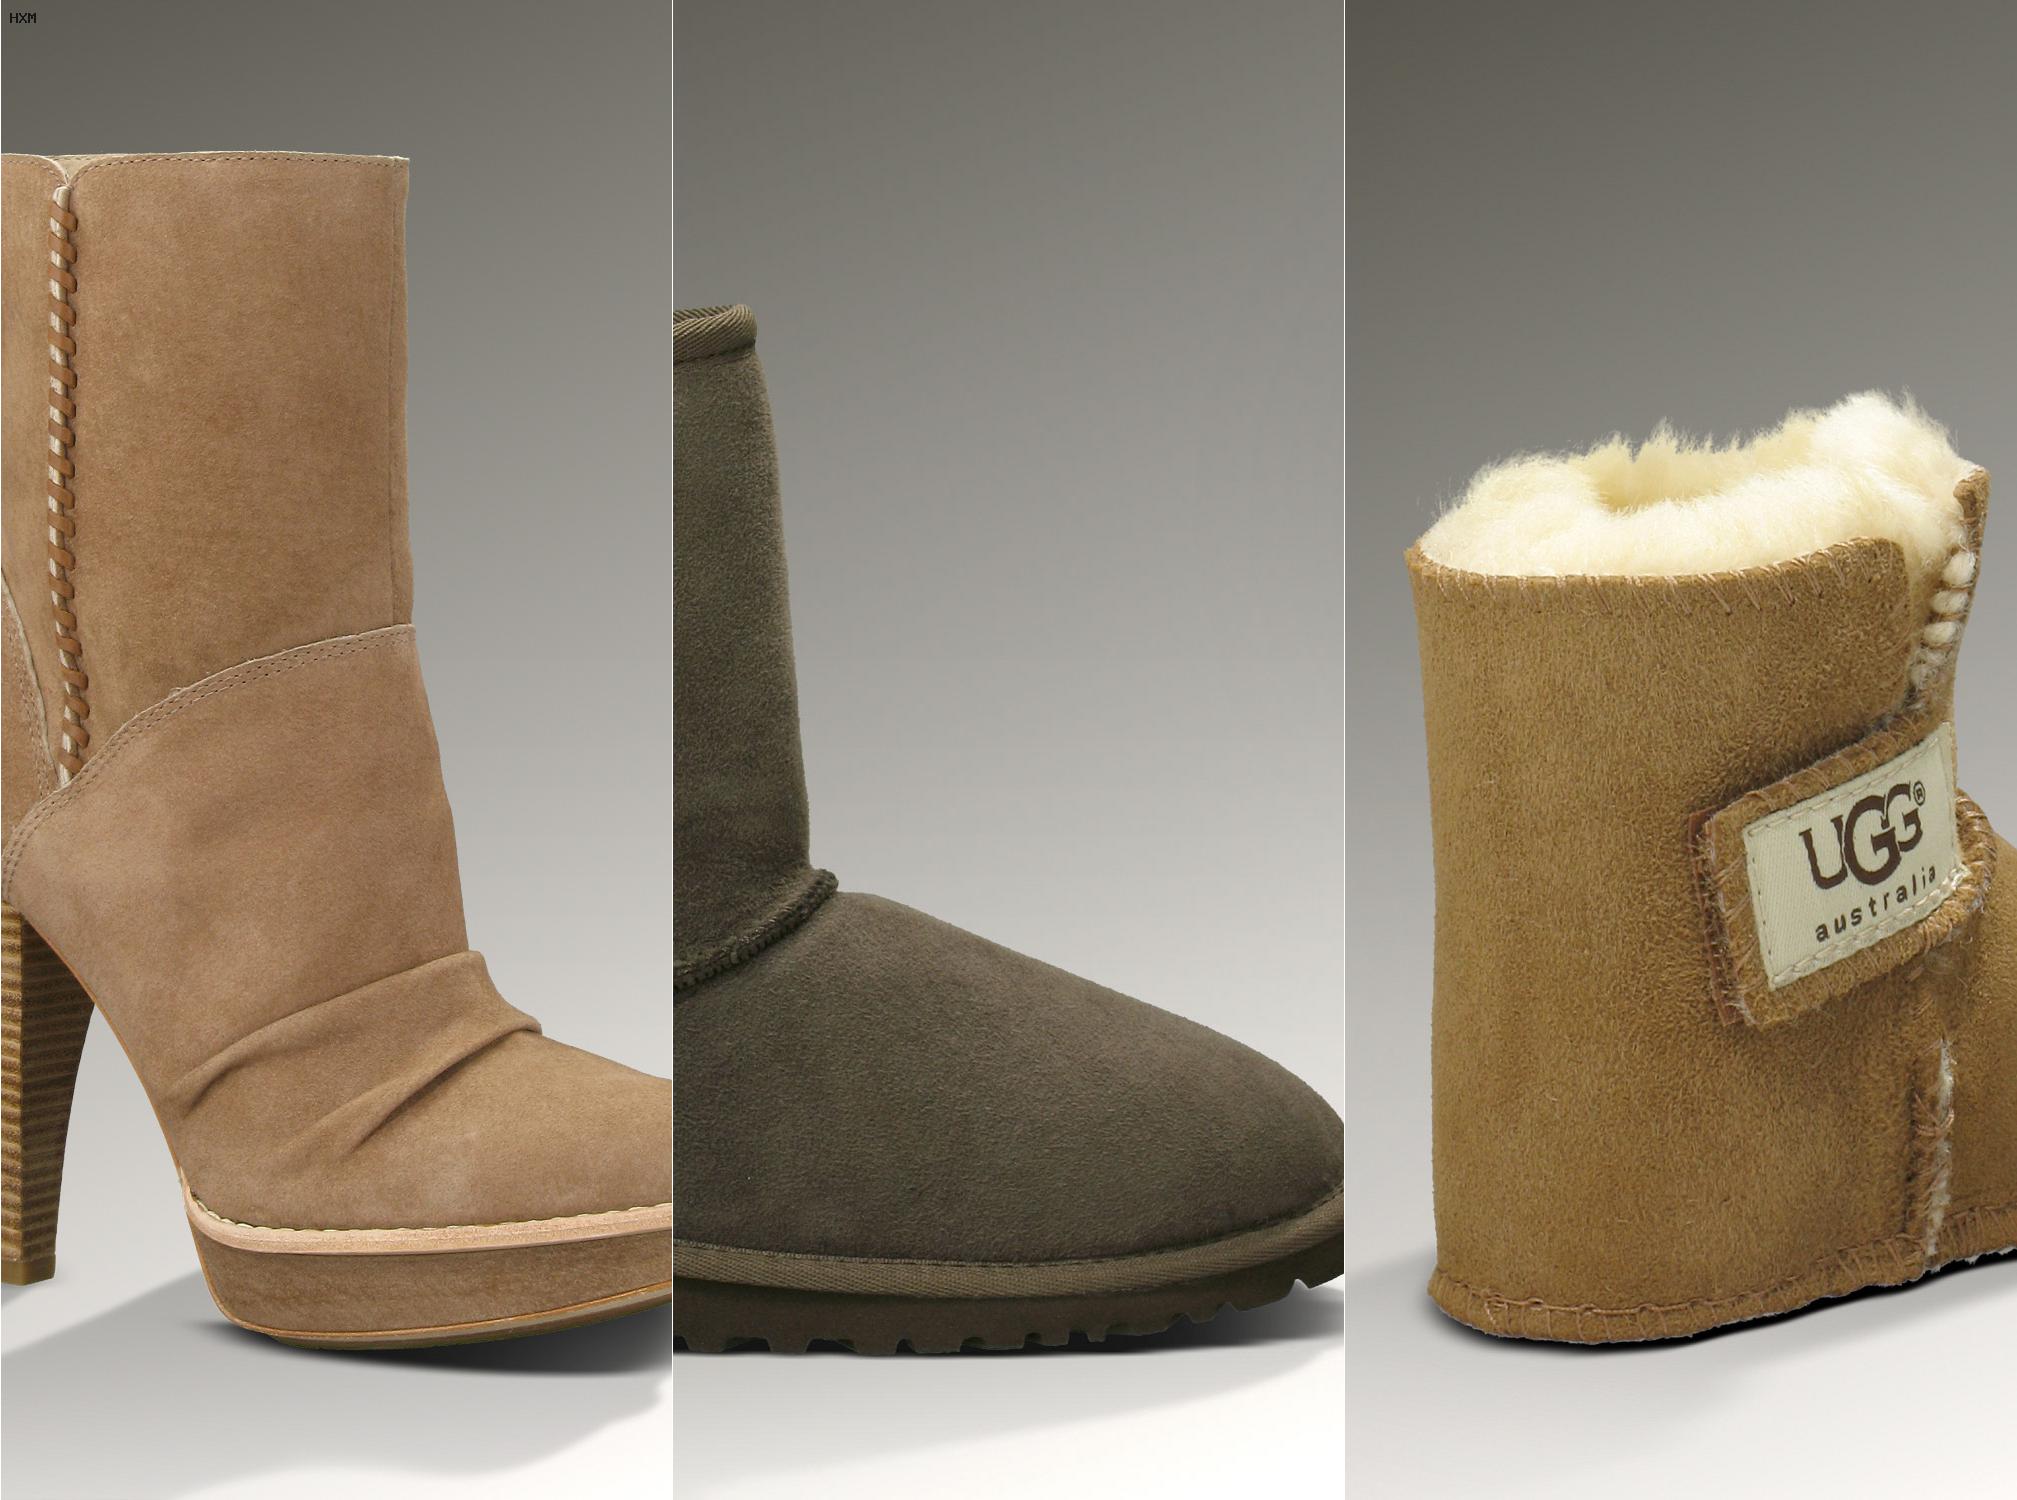 ugg baby shoes